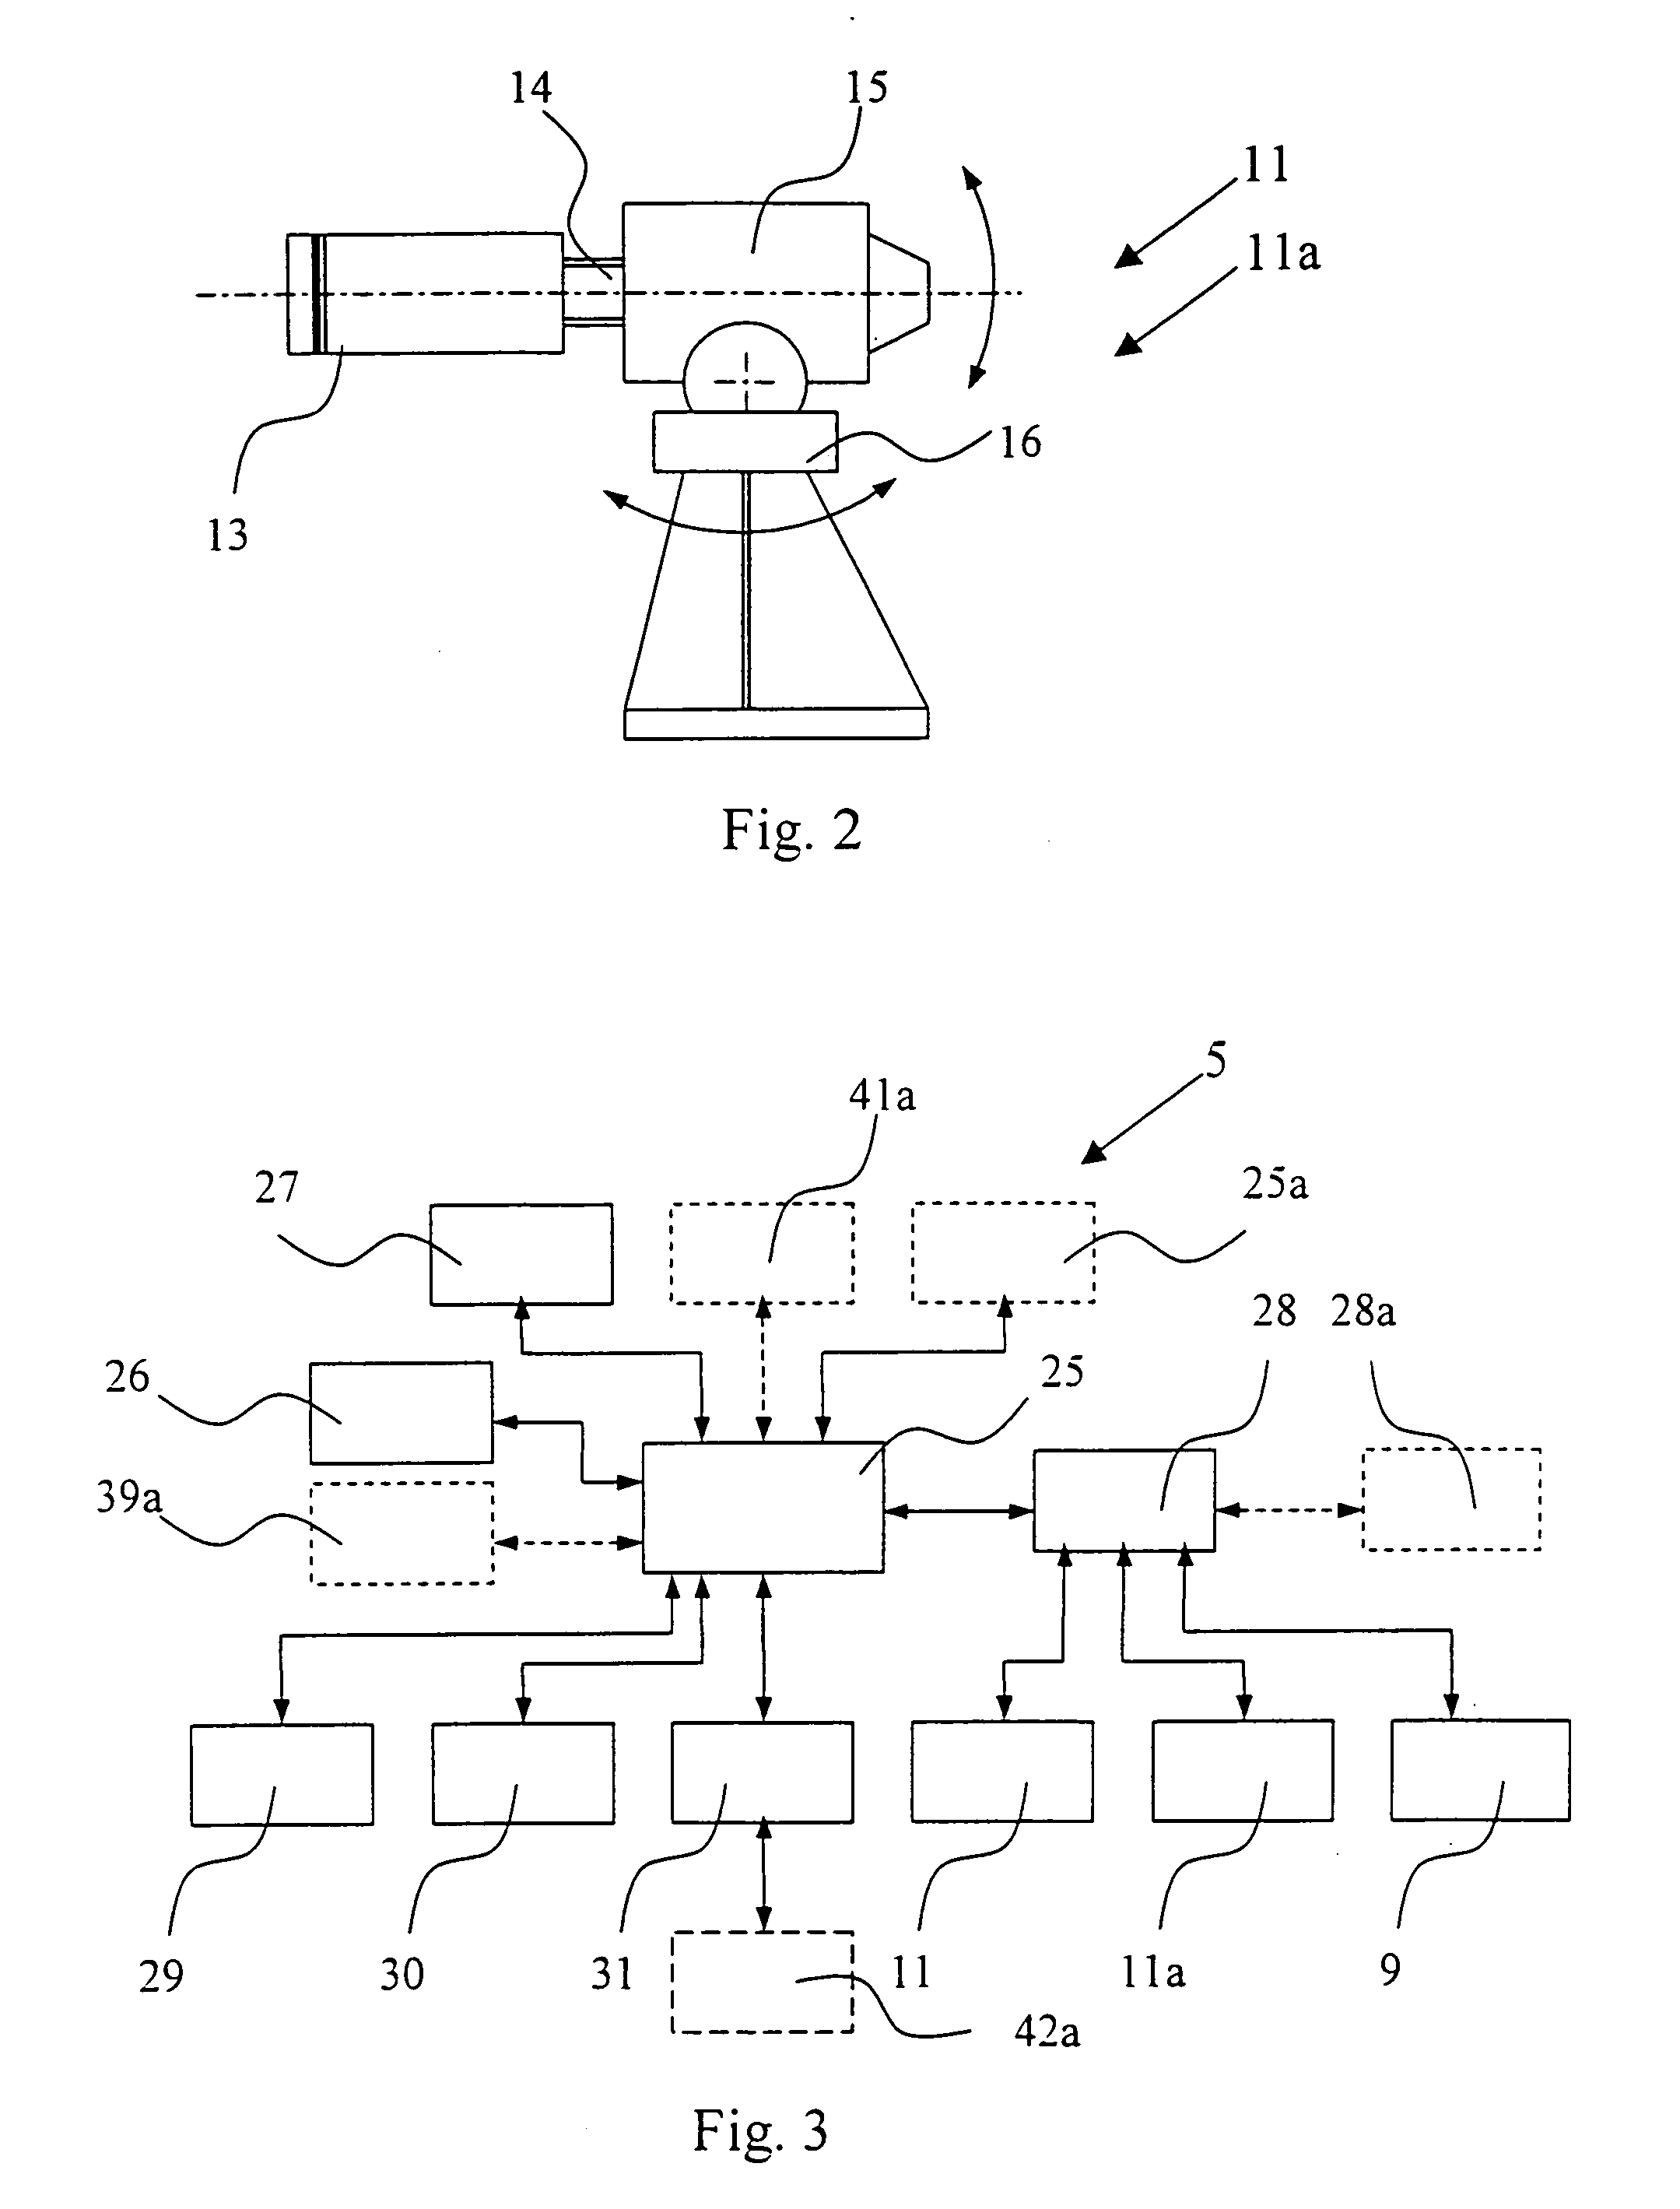 Control and communication system and method